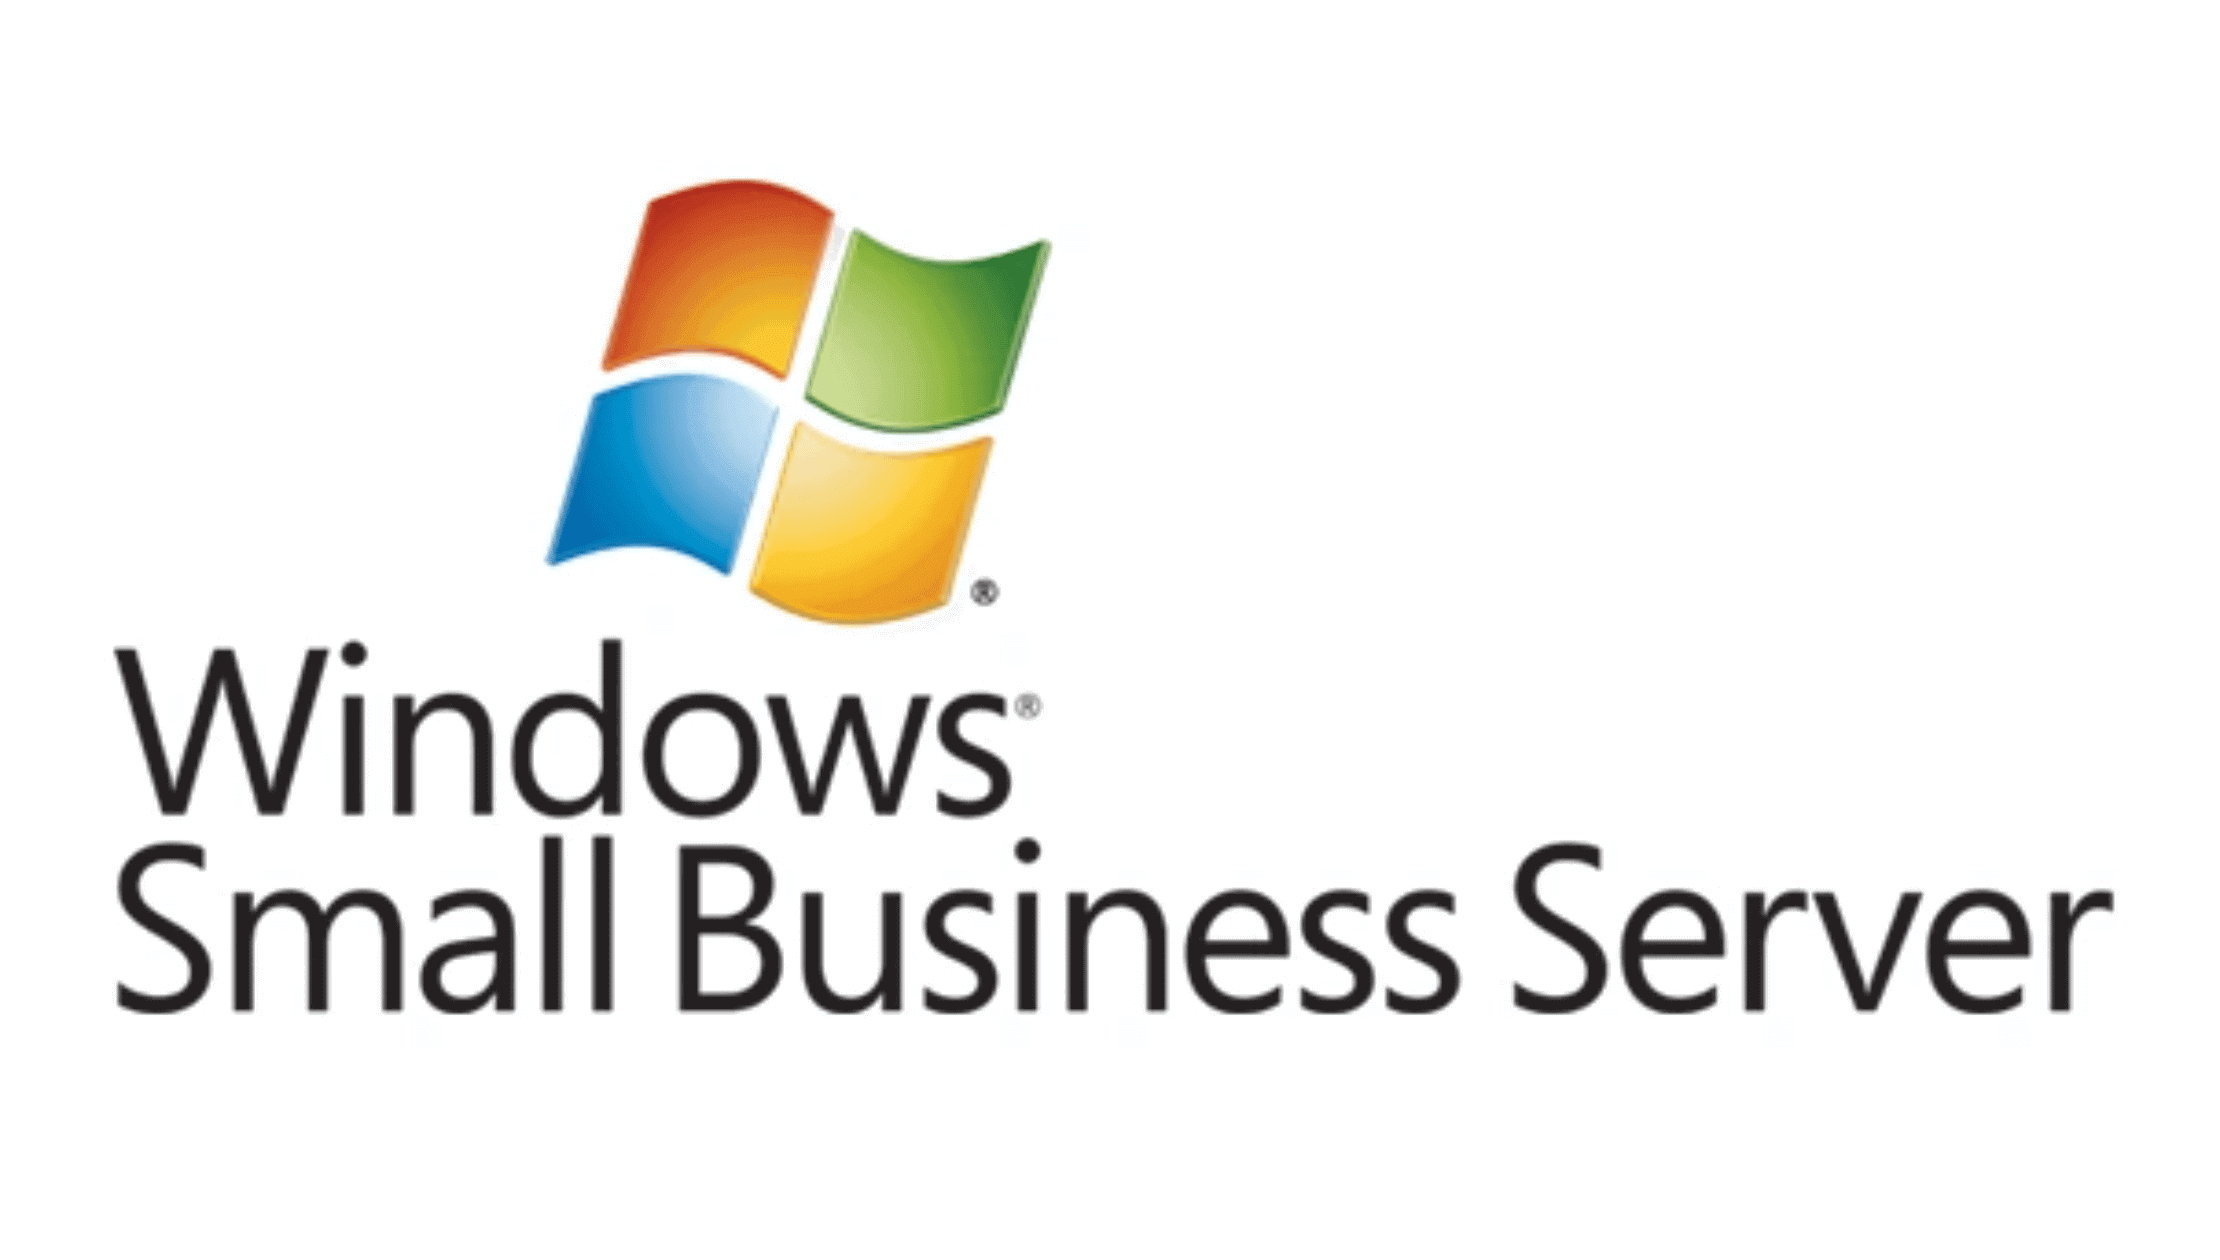 Unlock Potential with Windows Small Business Server Solutions